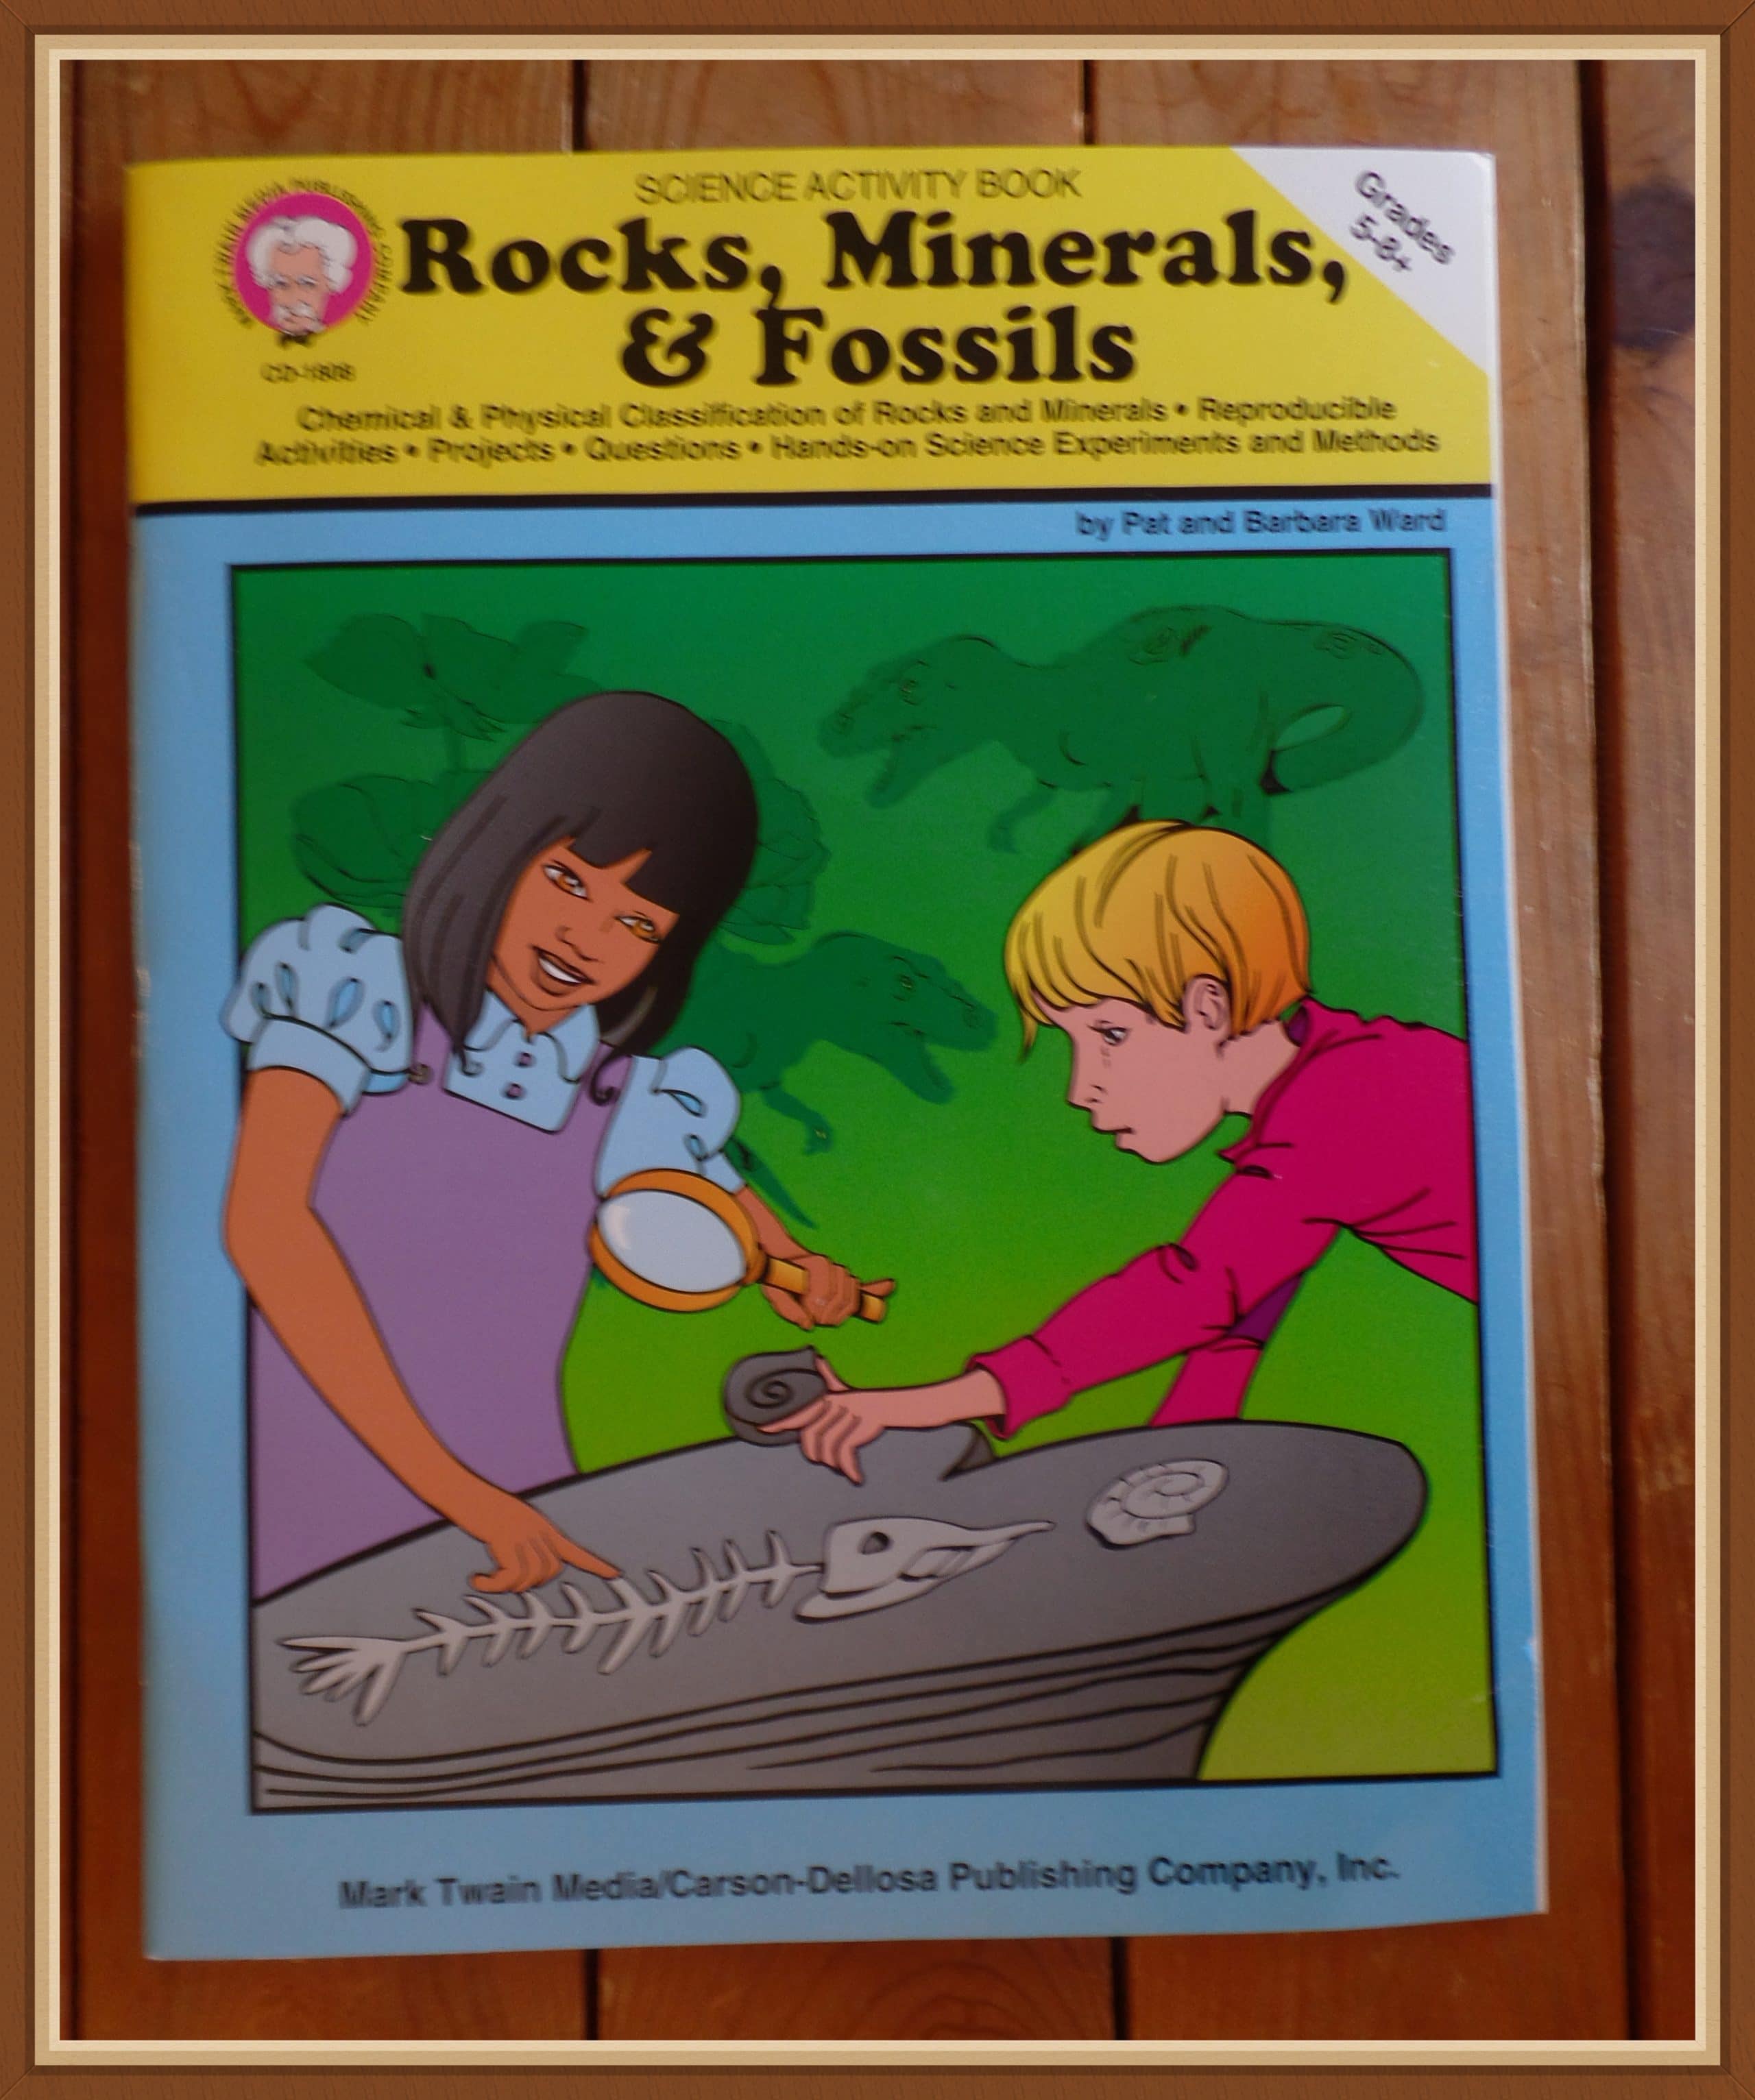 Middle School STEM Activity Books – Rocks, Minerals, & Fossils – My Review